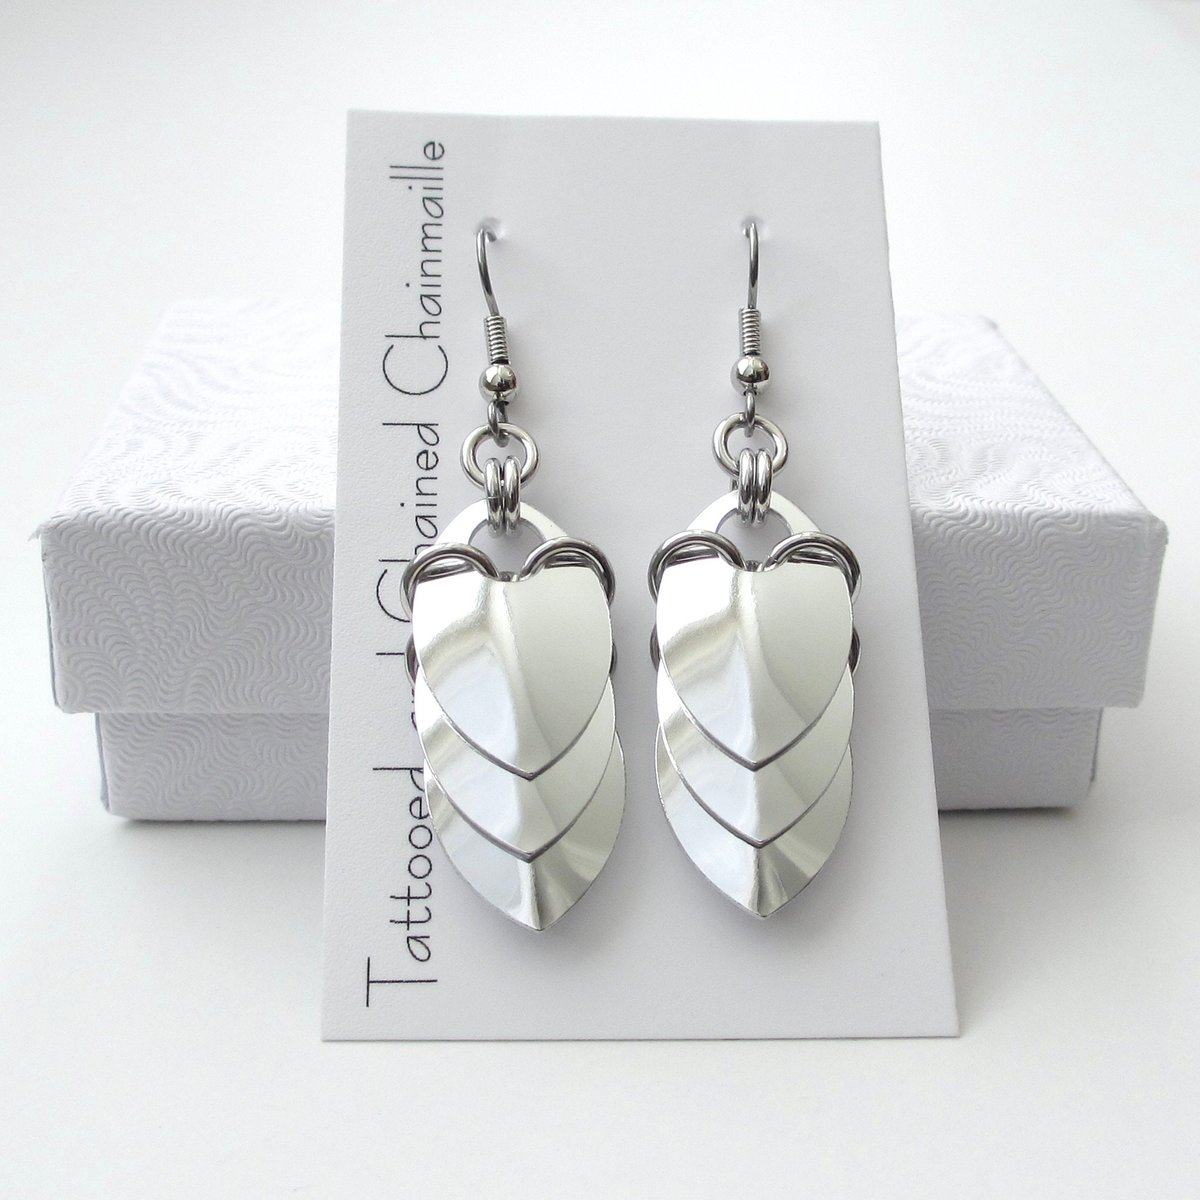 Silver aluminum chainmail scales earrings, shiny mirror finish, everyday wear lightweight non-tarnish jewelry